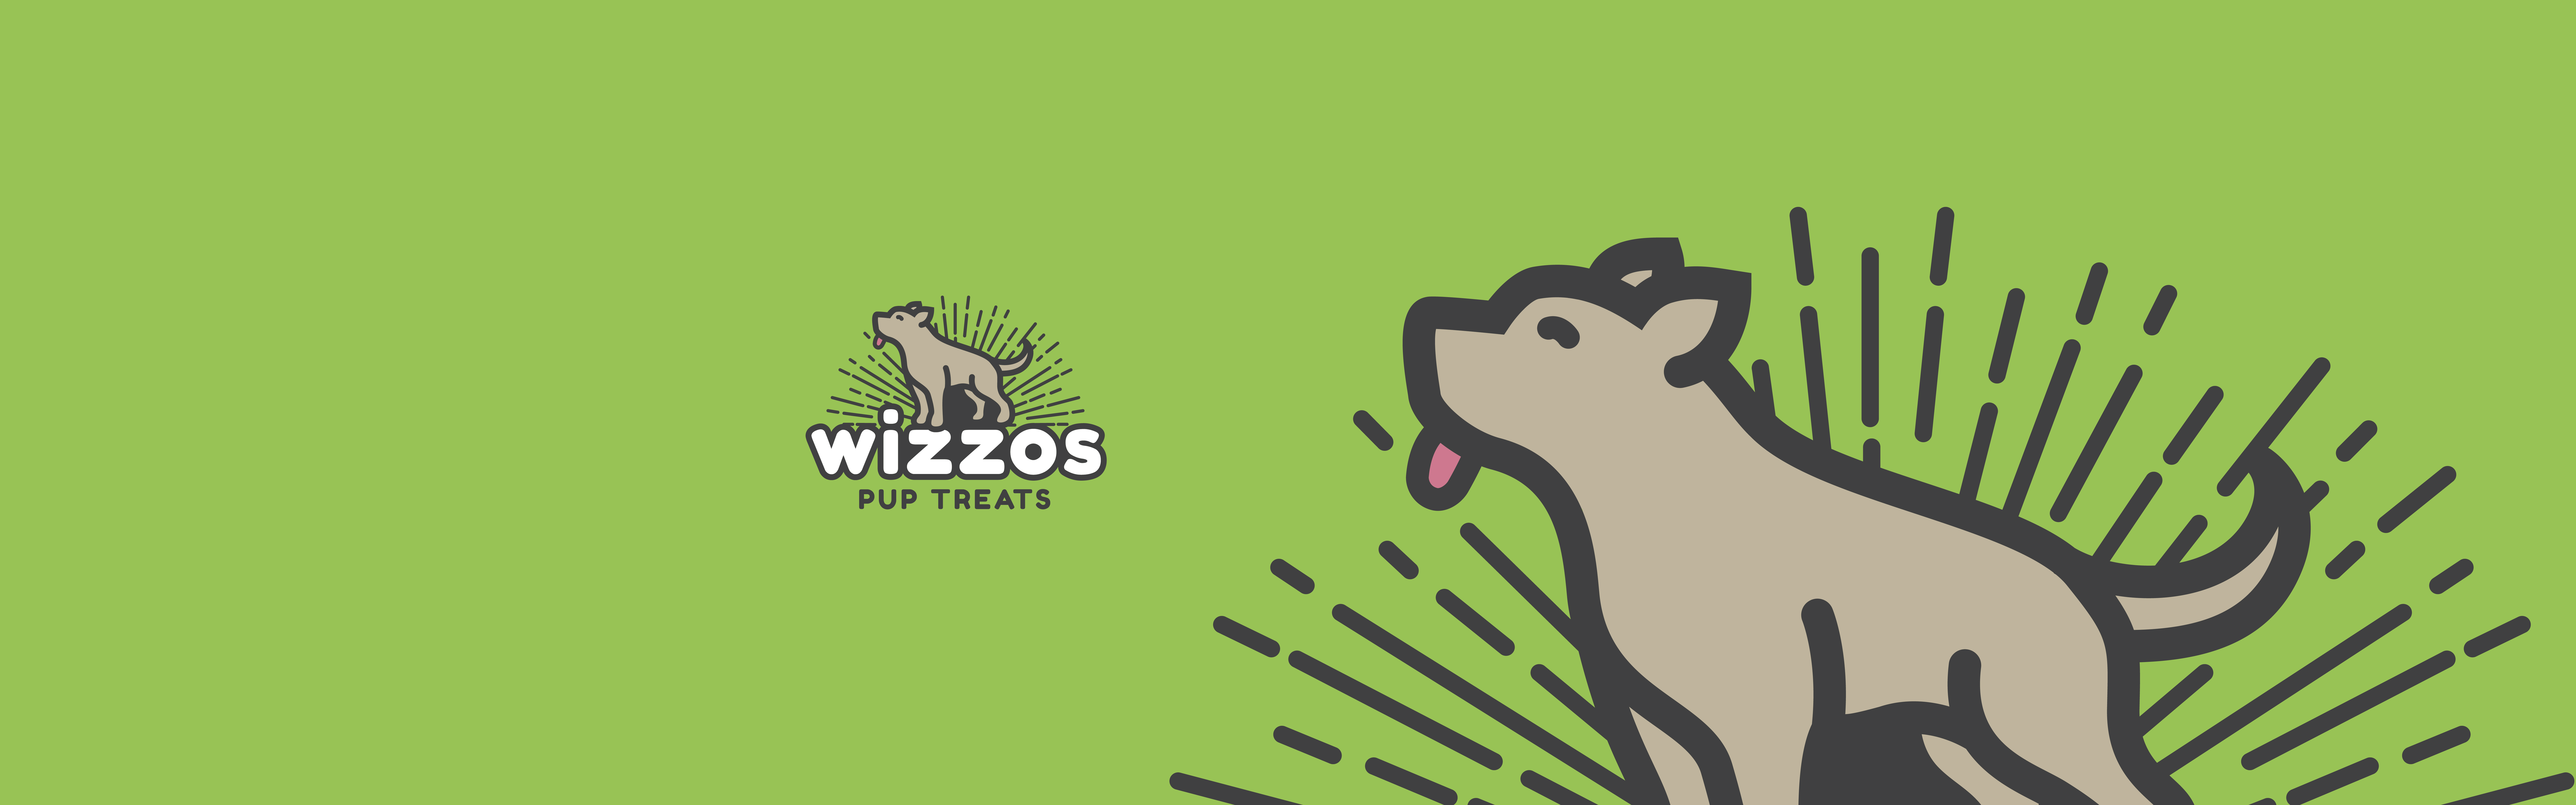 A cartoon-style illustration of a dog with its tongue out, against a green background, with radiant lines suggesting excitement or movement, alongside the text "Wizzos Pup Treats.